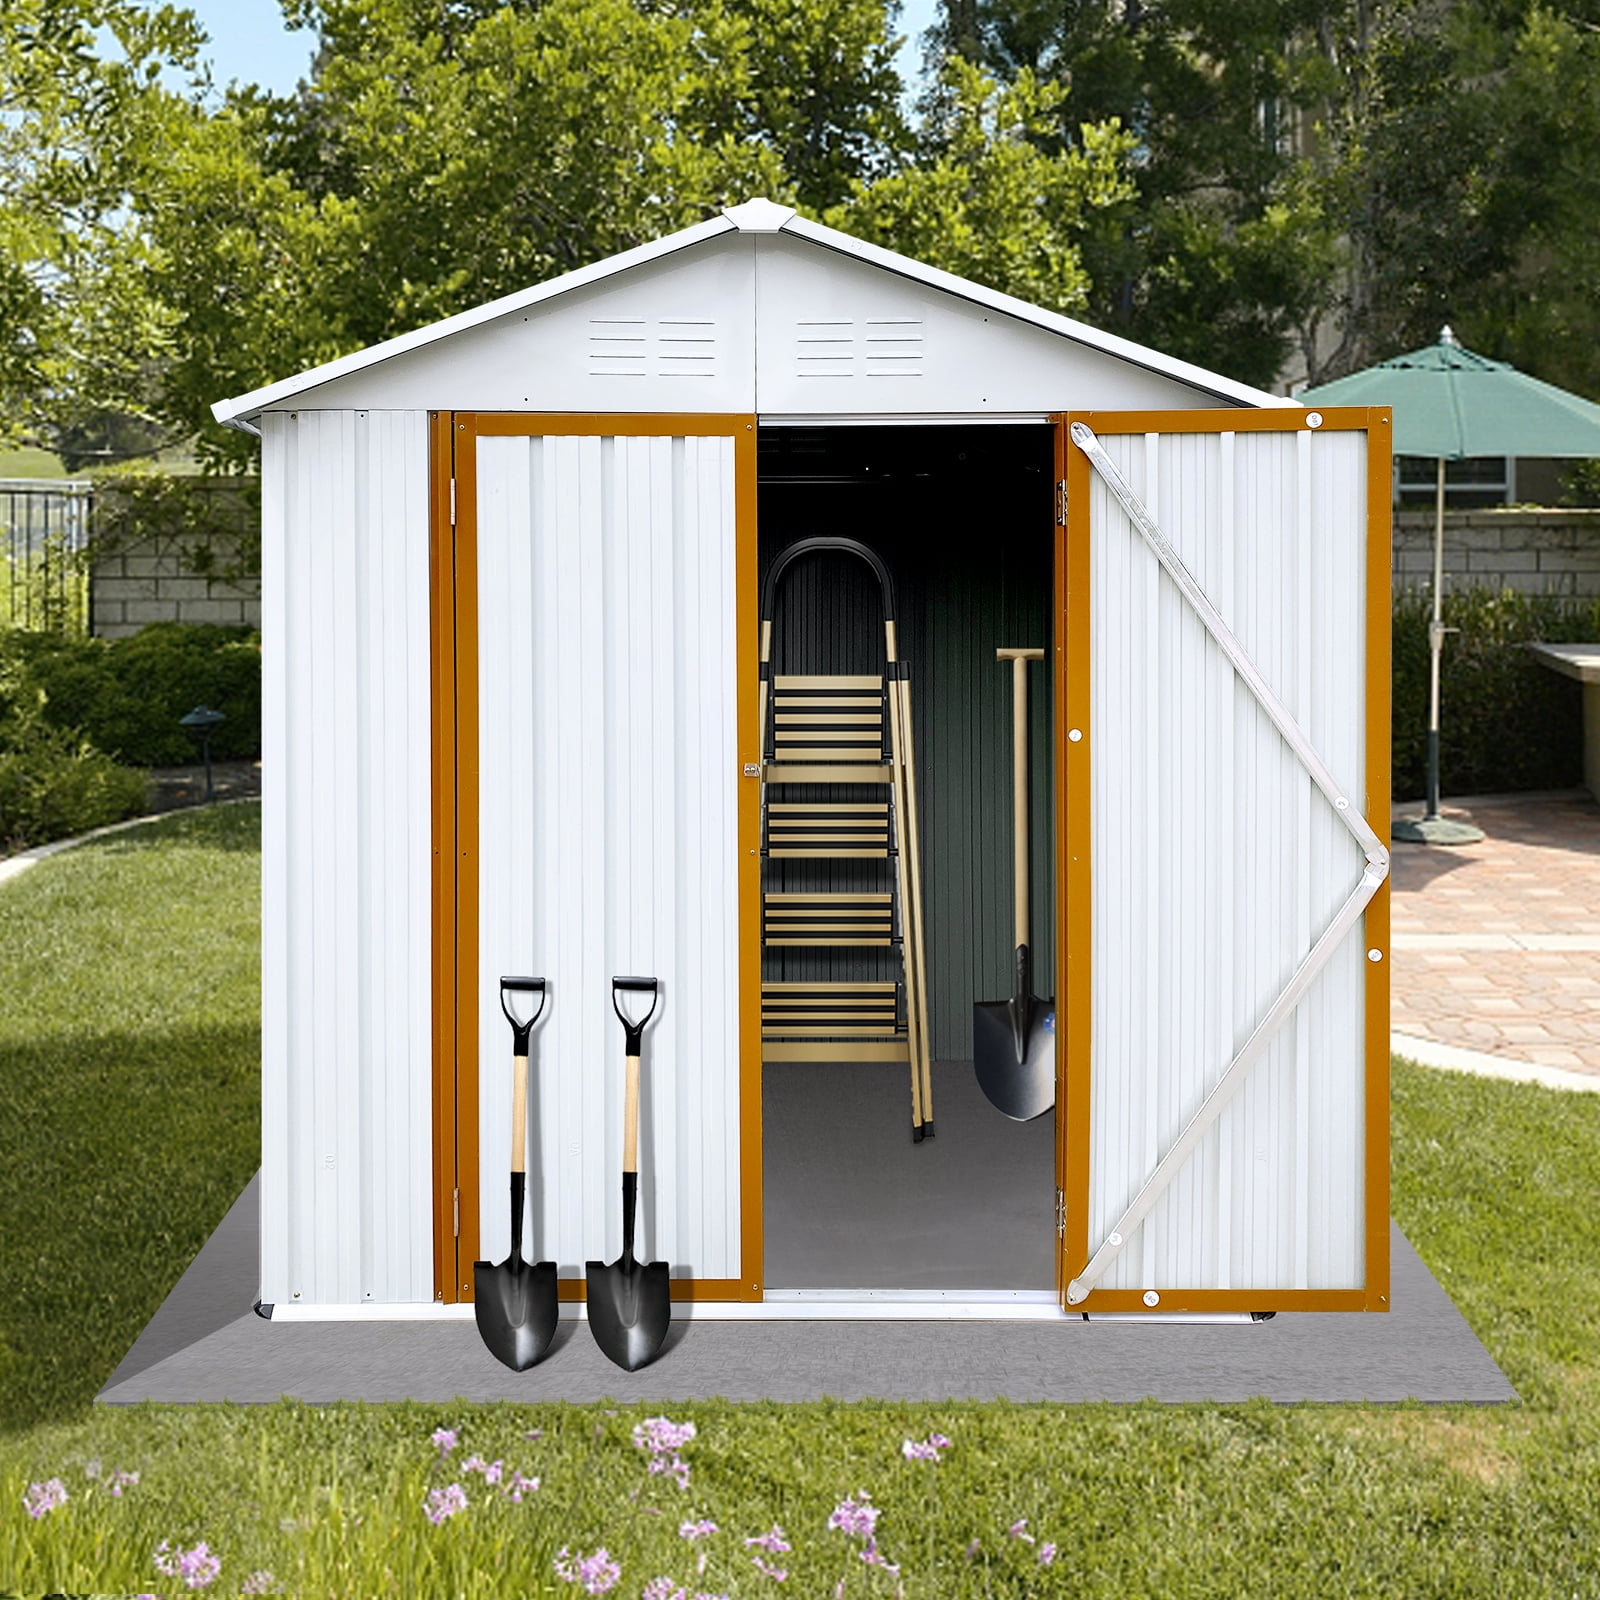 6 x 4 ft Sheds and Outdoor Storage, Metal Storage Shed with Sliding Roof  and Lockable Door for Garden Tools, Bike and Garbage Can, Waterproof  Outdoor